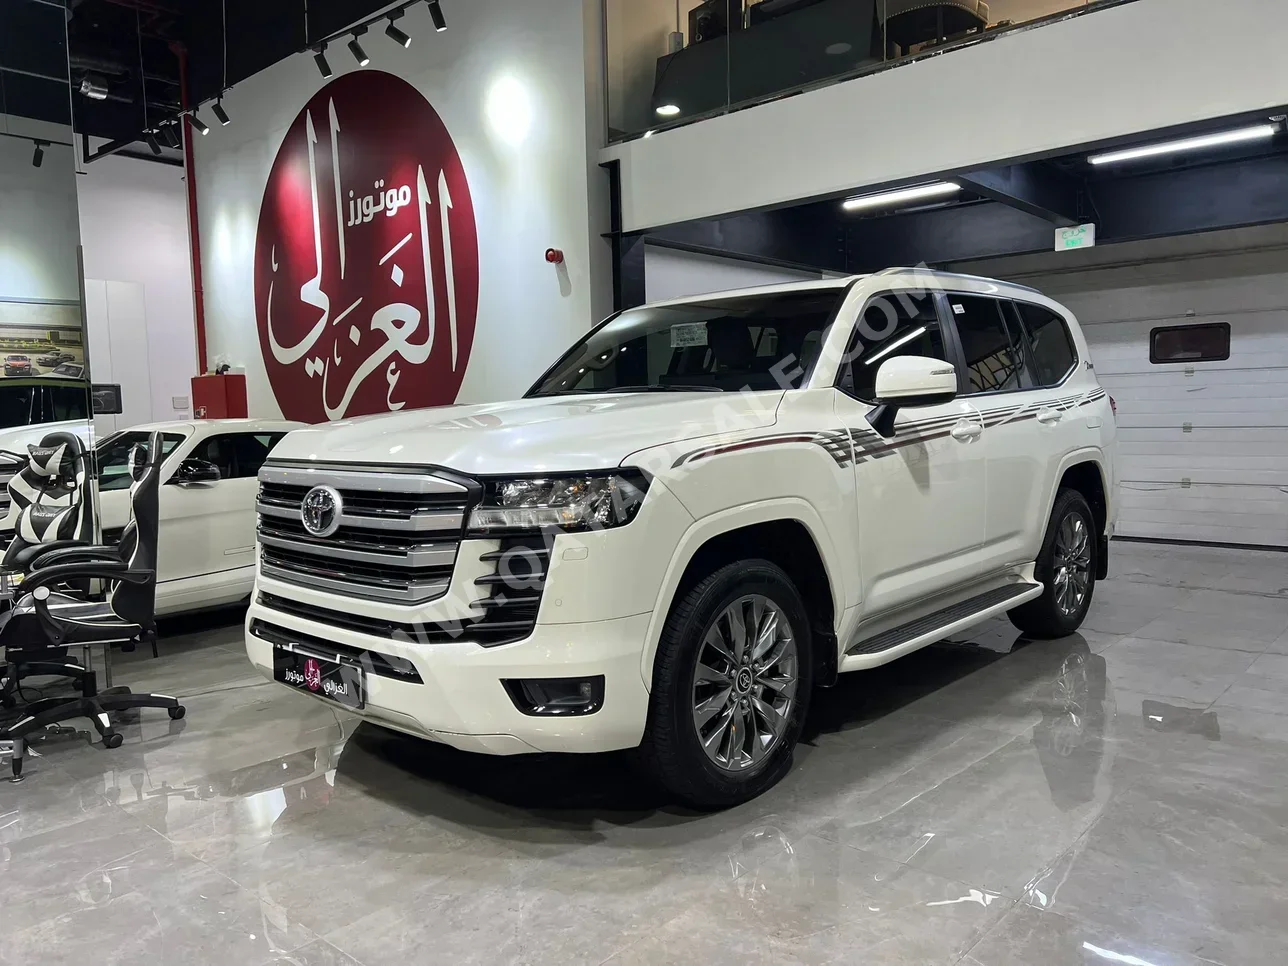 Toyota  Land Cruiser  GXR Twin Turbo  2022  Automatic  19,000 Km  6 Cylinder  Four Wheel Drive (4WD)  SUV  White  With Warranty